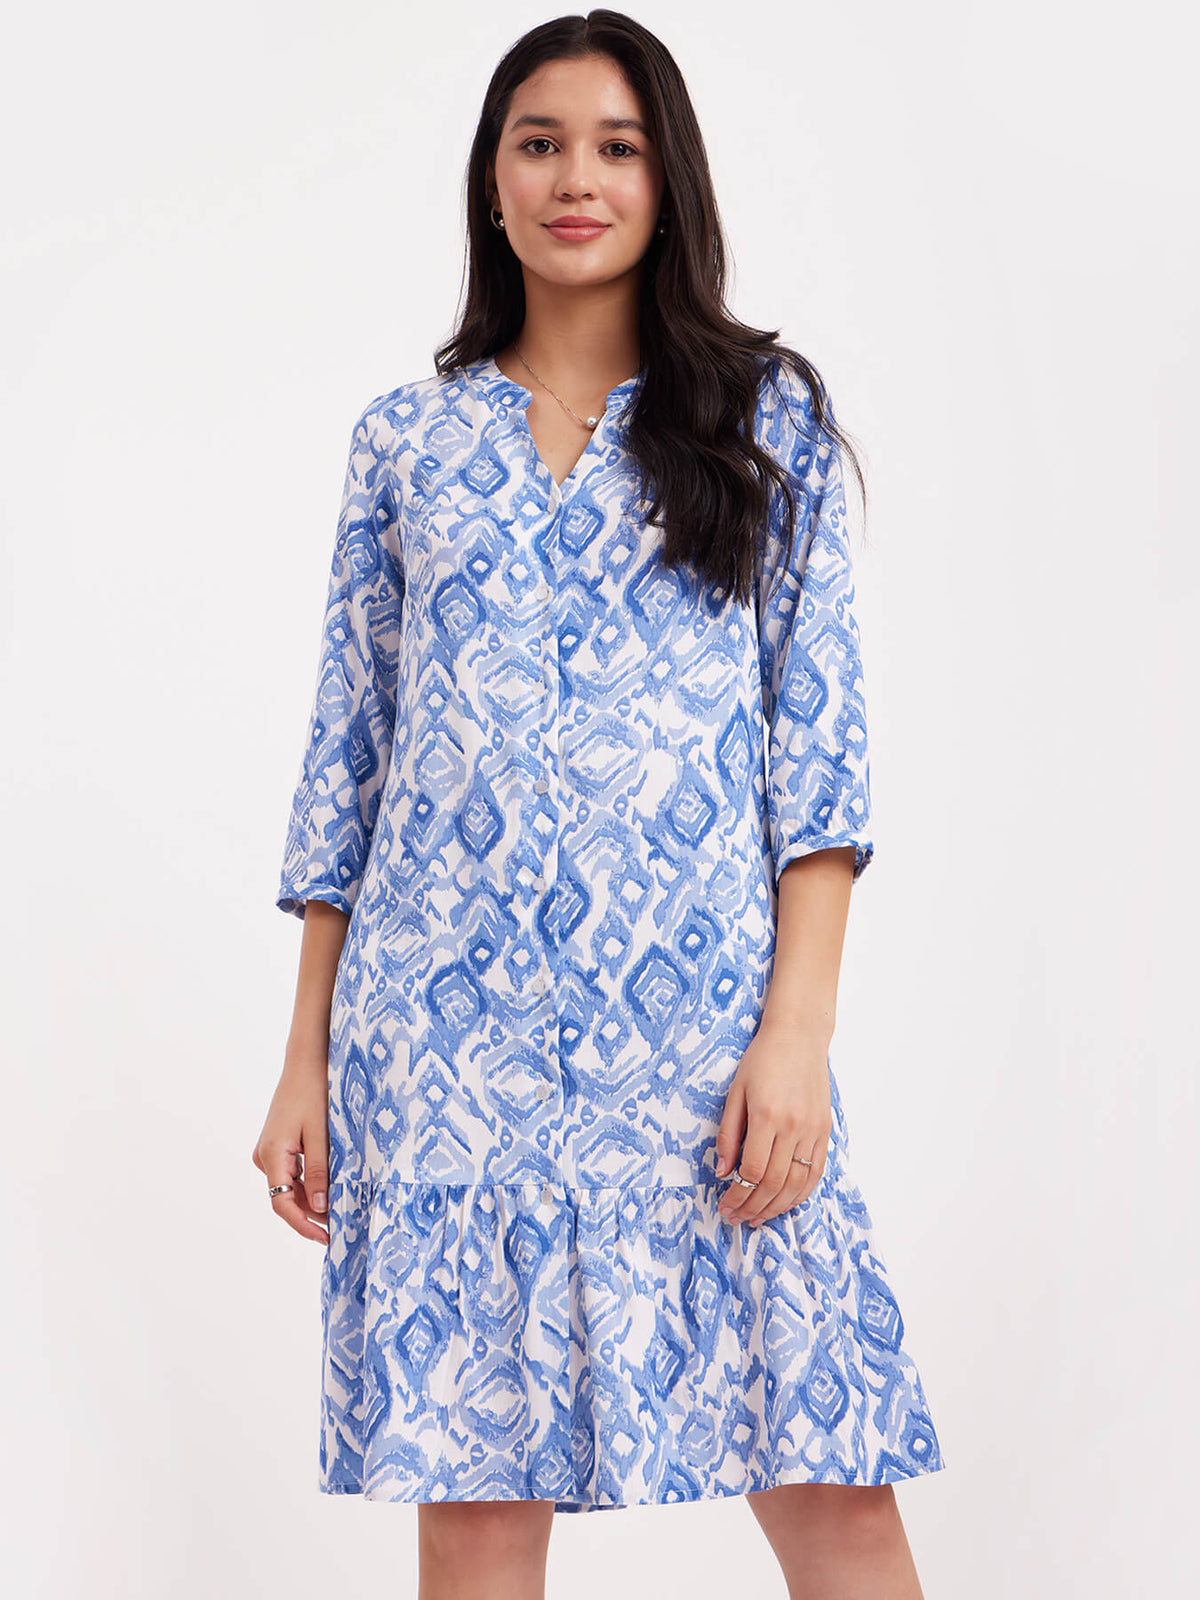 Abstract Print Shirt Dress - Blue And White